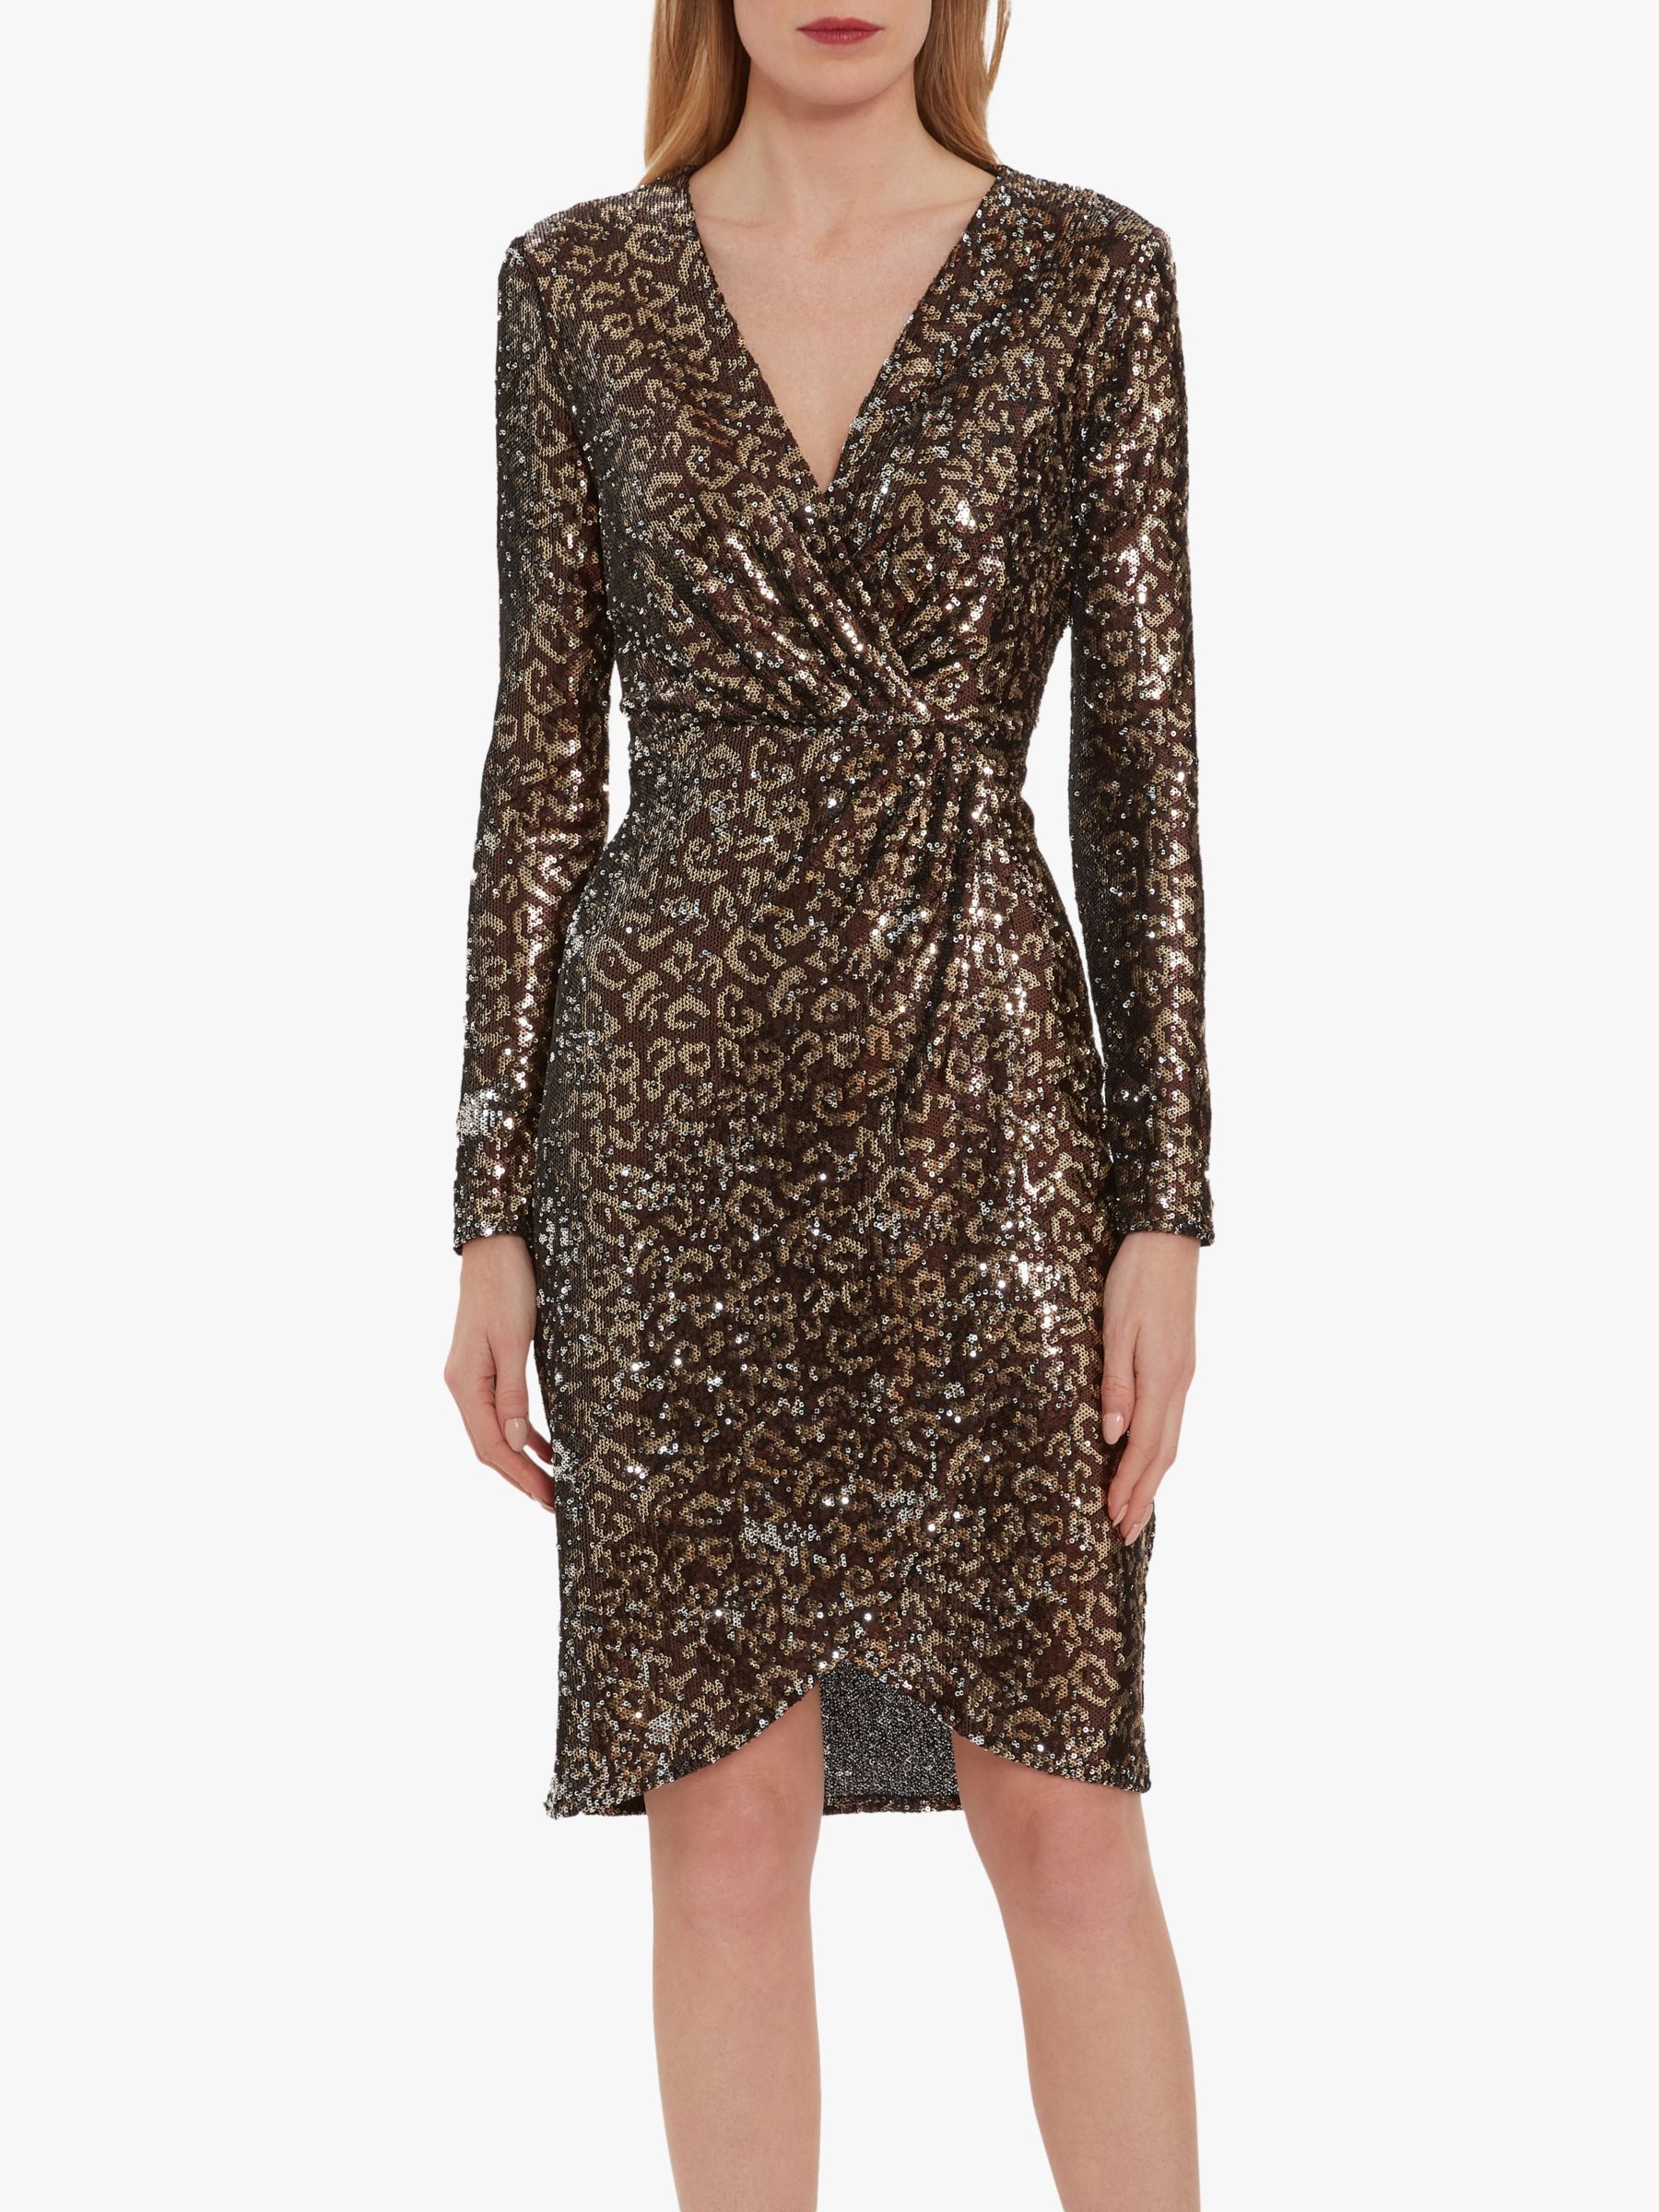 Gina Bacconi Clarice Sequin Leopard Print Wrap Dress, Brown/Gold